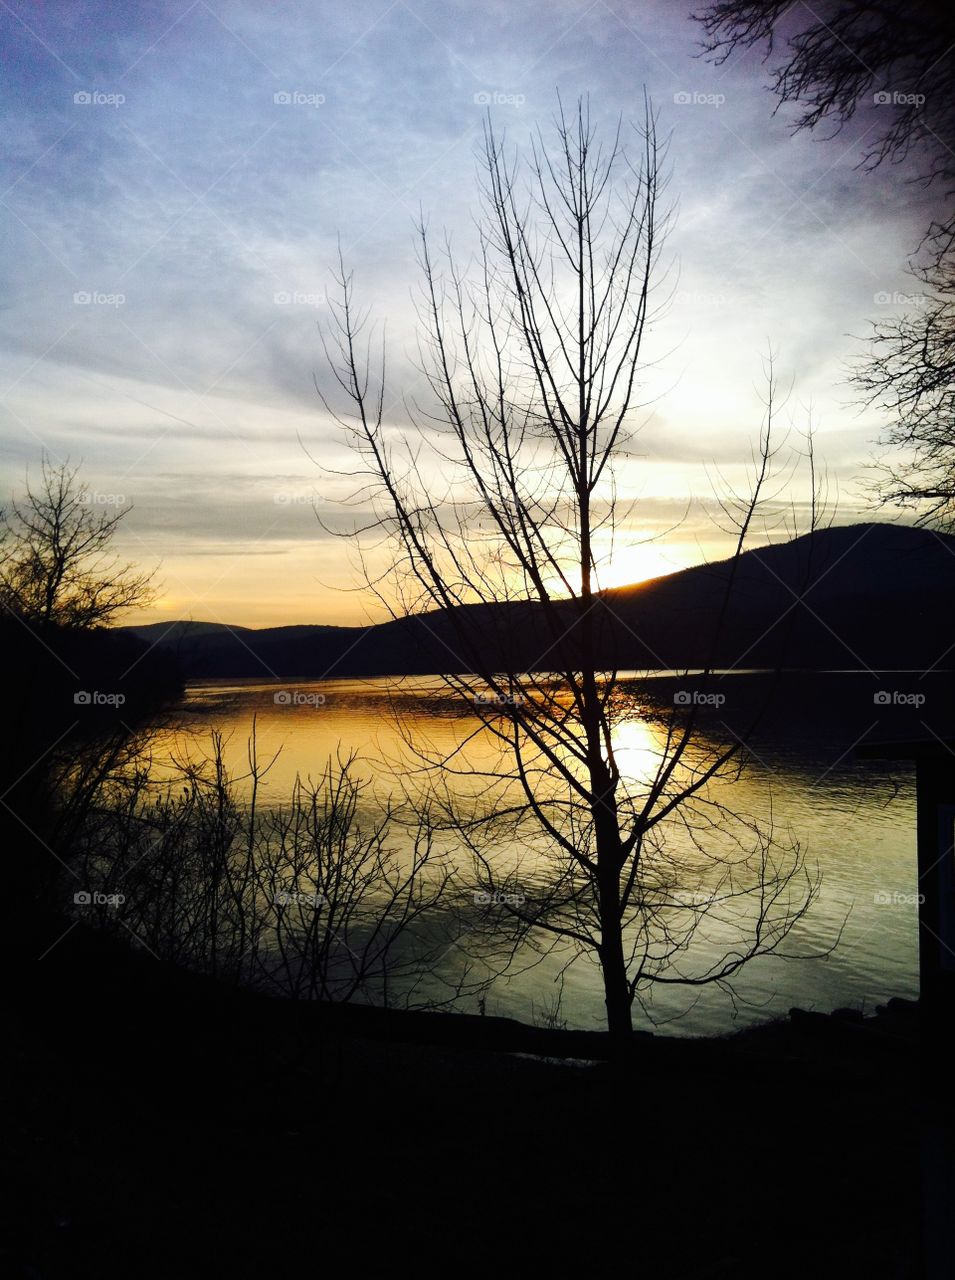 Winter Sunset on the Hudson. Trees fall on shadow as the sun falls behind the mountains on the Hudson River